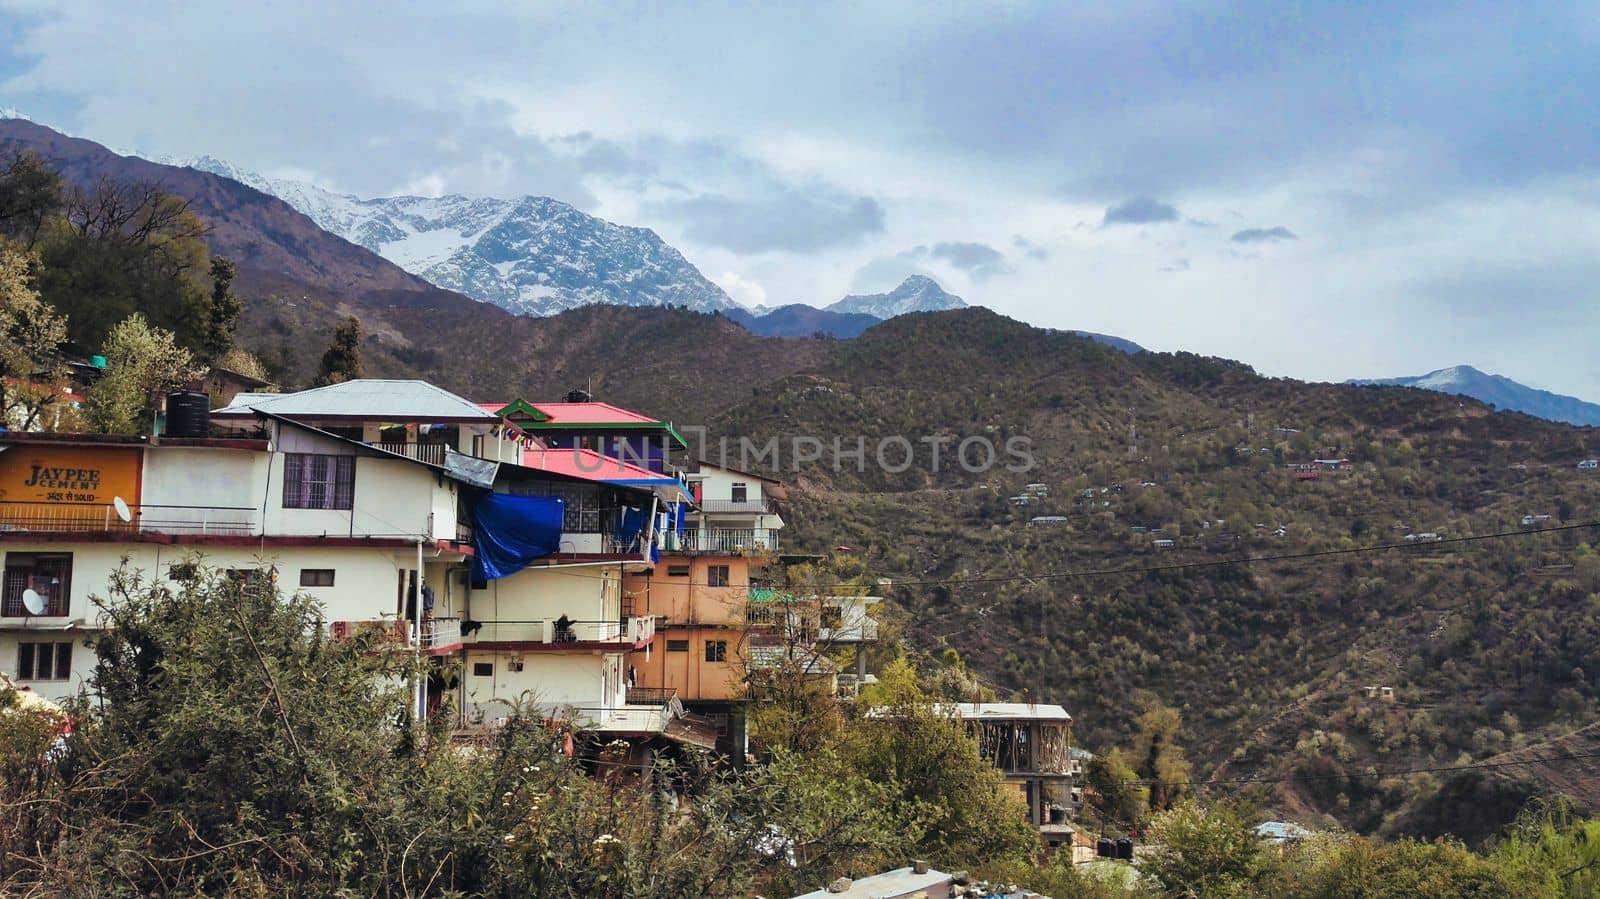 Guesthouse in McLeod Ganj with Mountain Landscape, Dharamshala, India by SweCreatives